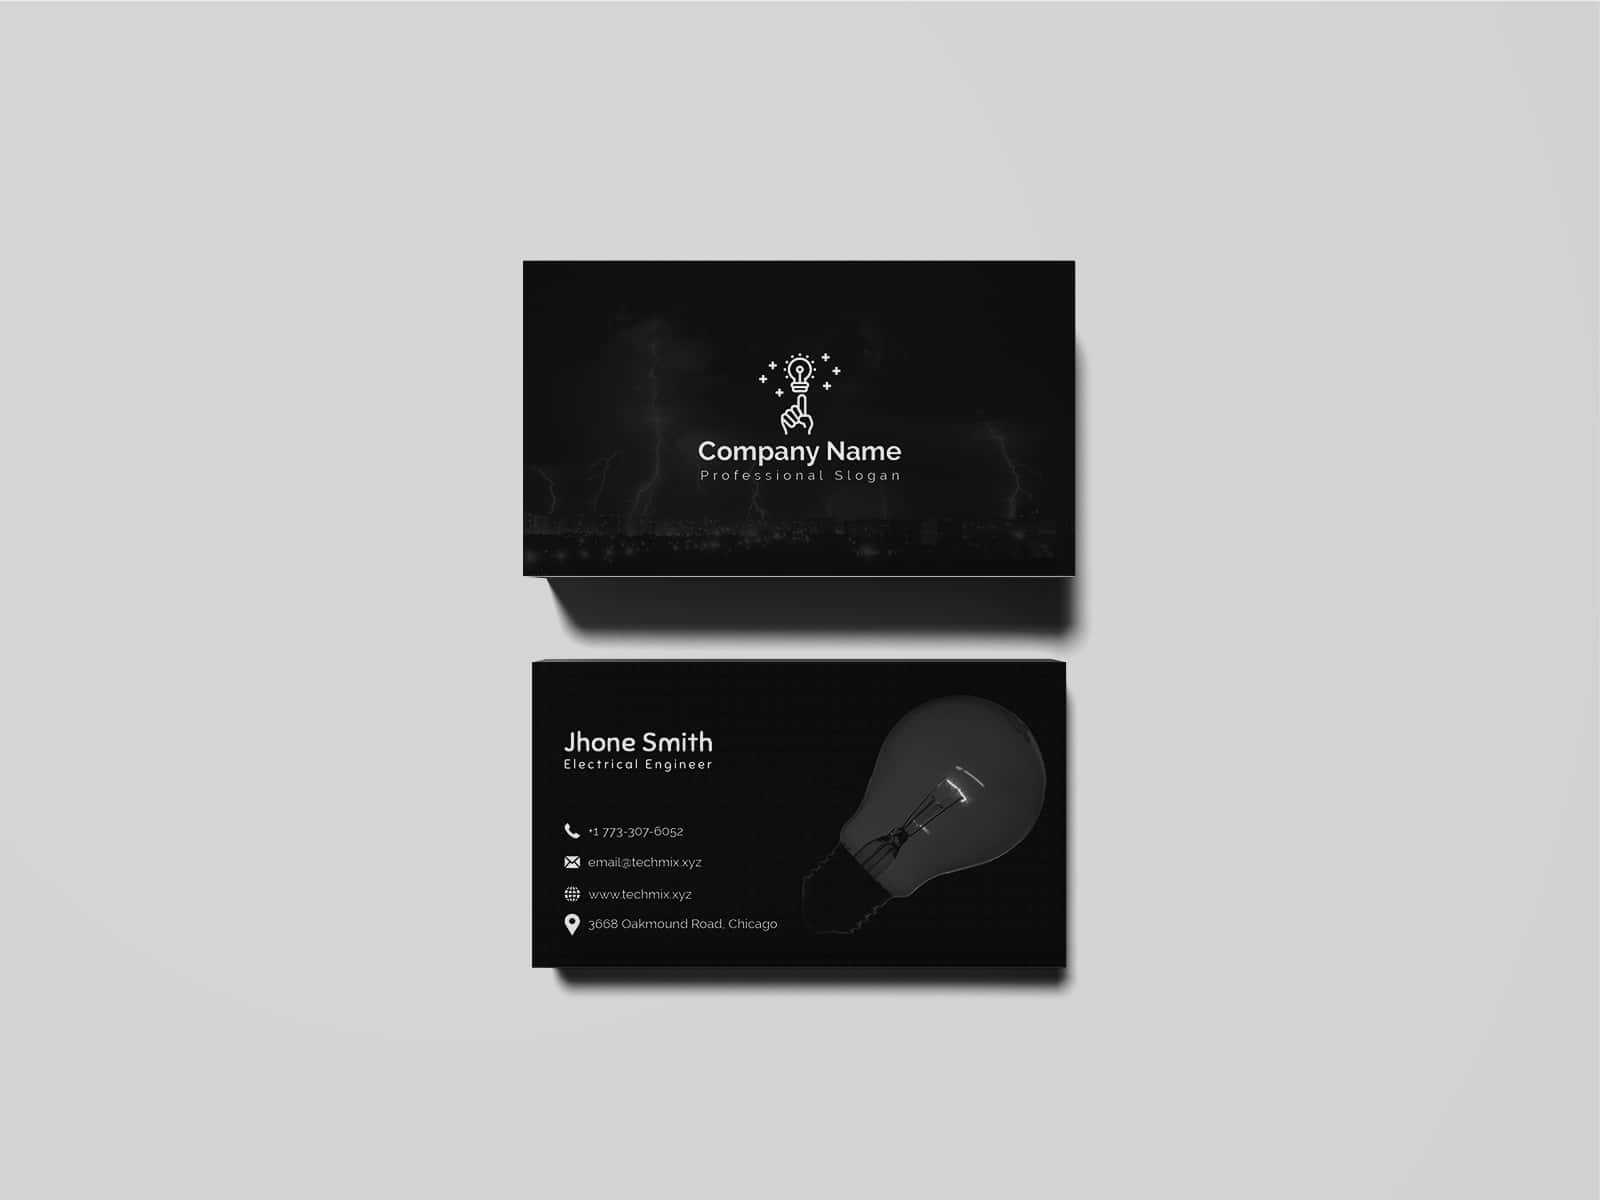 Electrical Engineer Business Card Template In Buisness Card Template